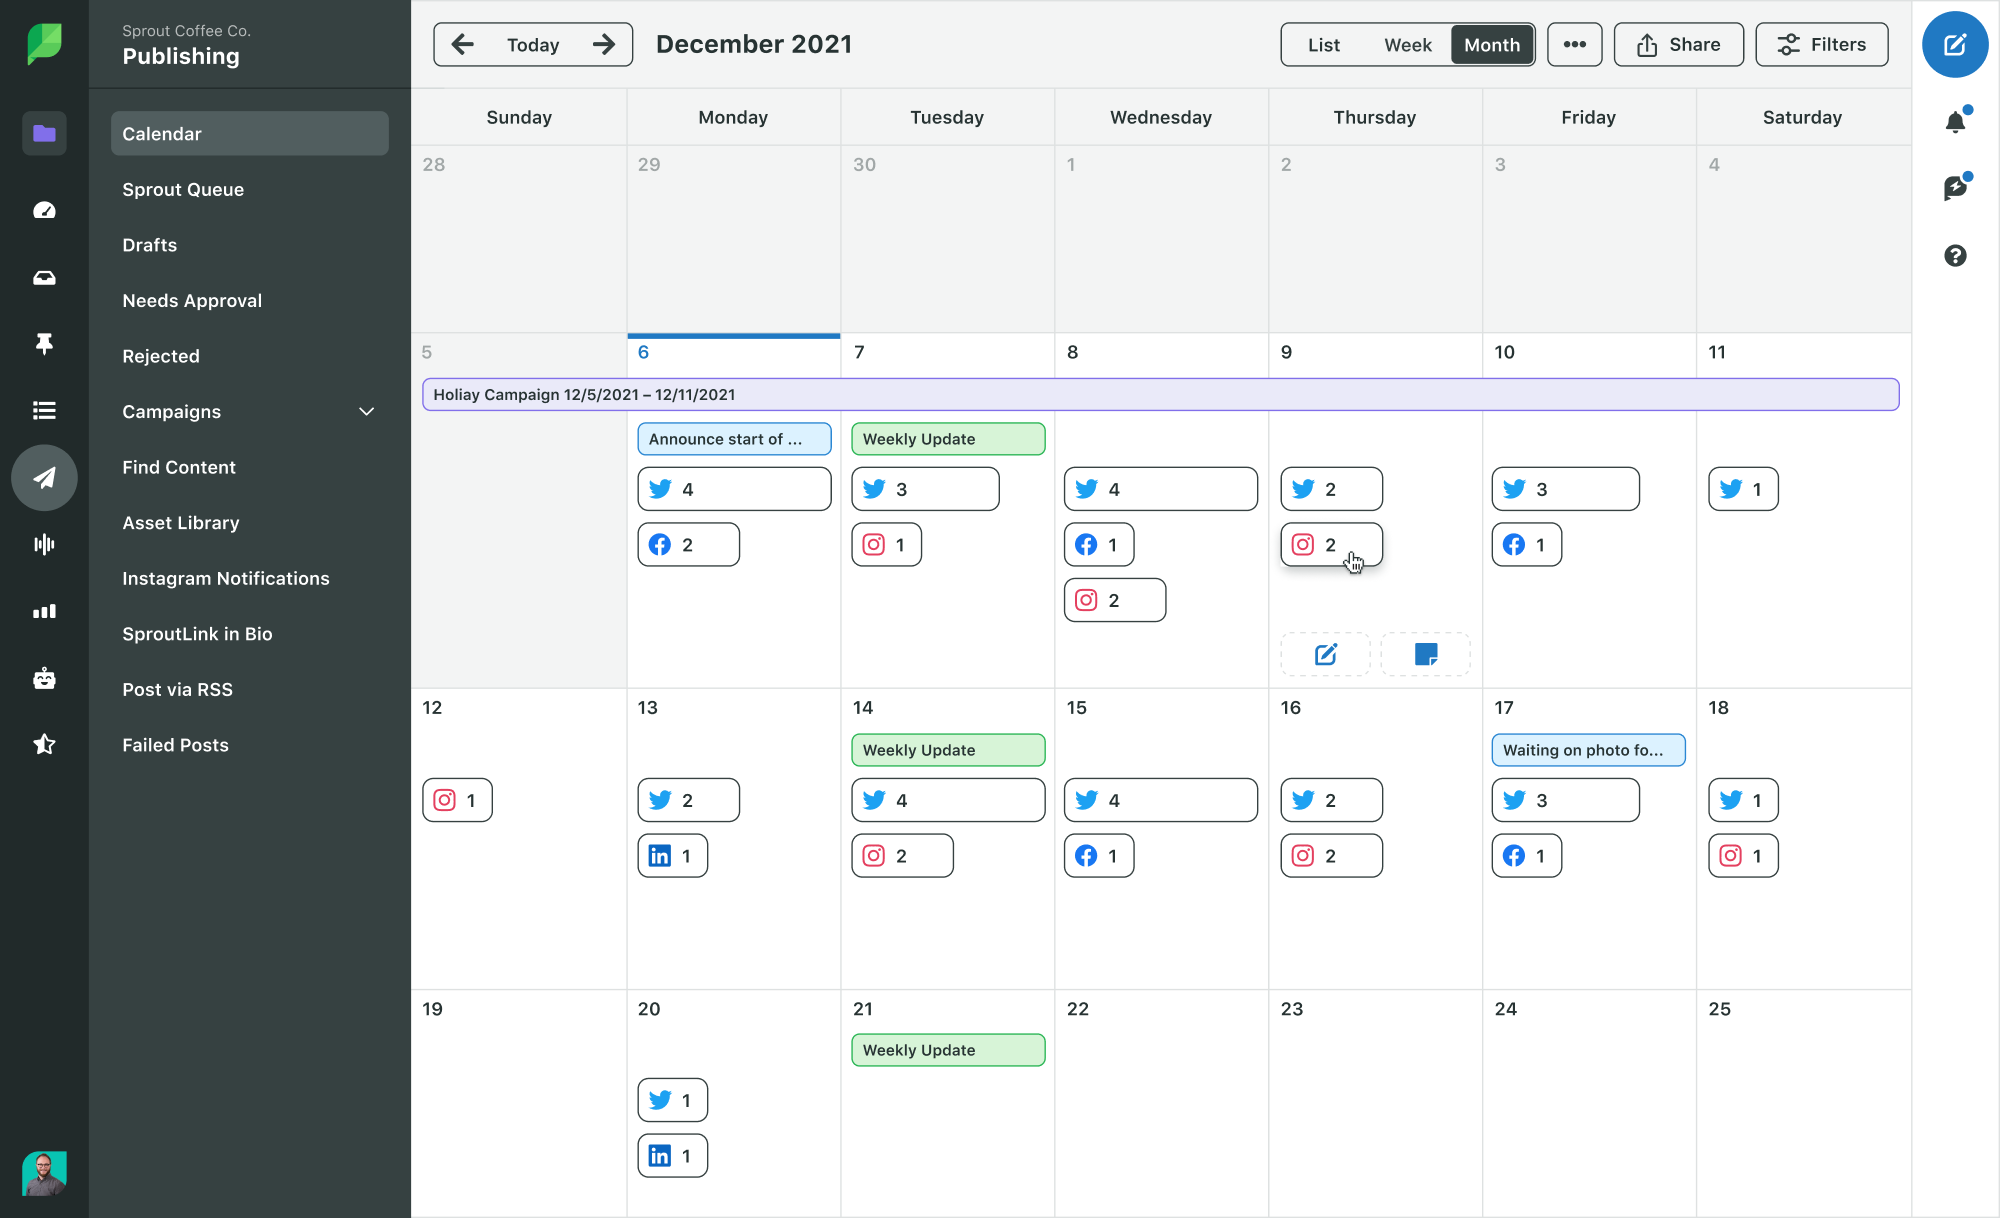 Sprout Social Publishing Calendar in month view